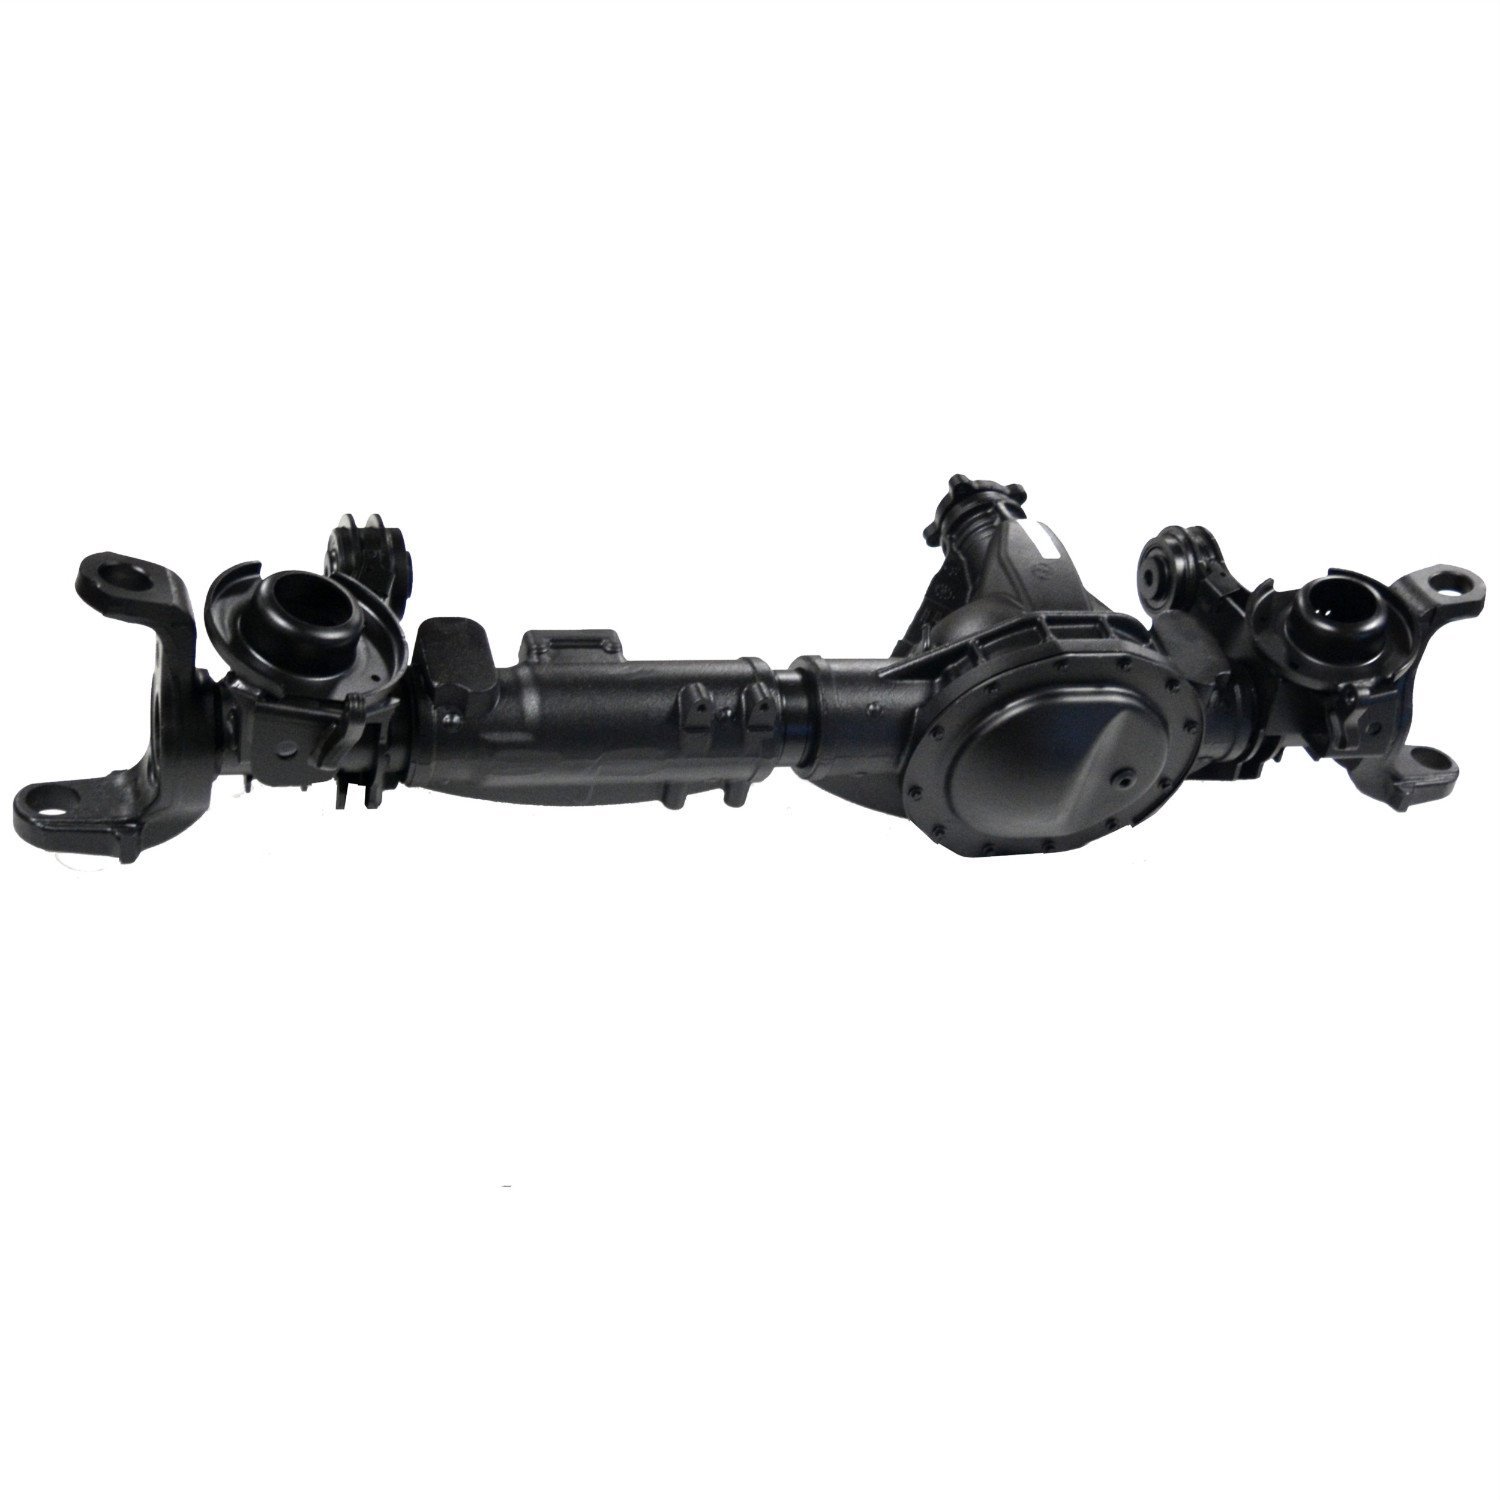 Remanufactured Front Axle Assembly 2013 Dodge Ram 3500 9.25" 3.42 Ratio